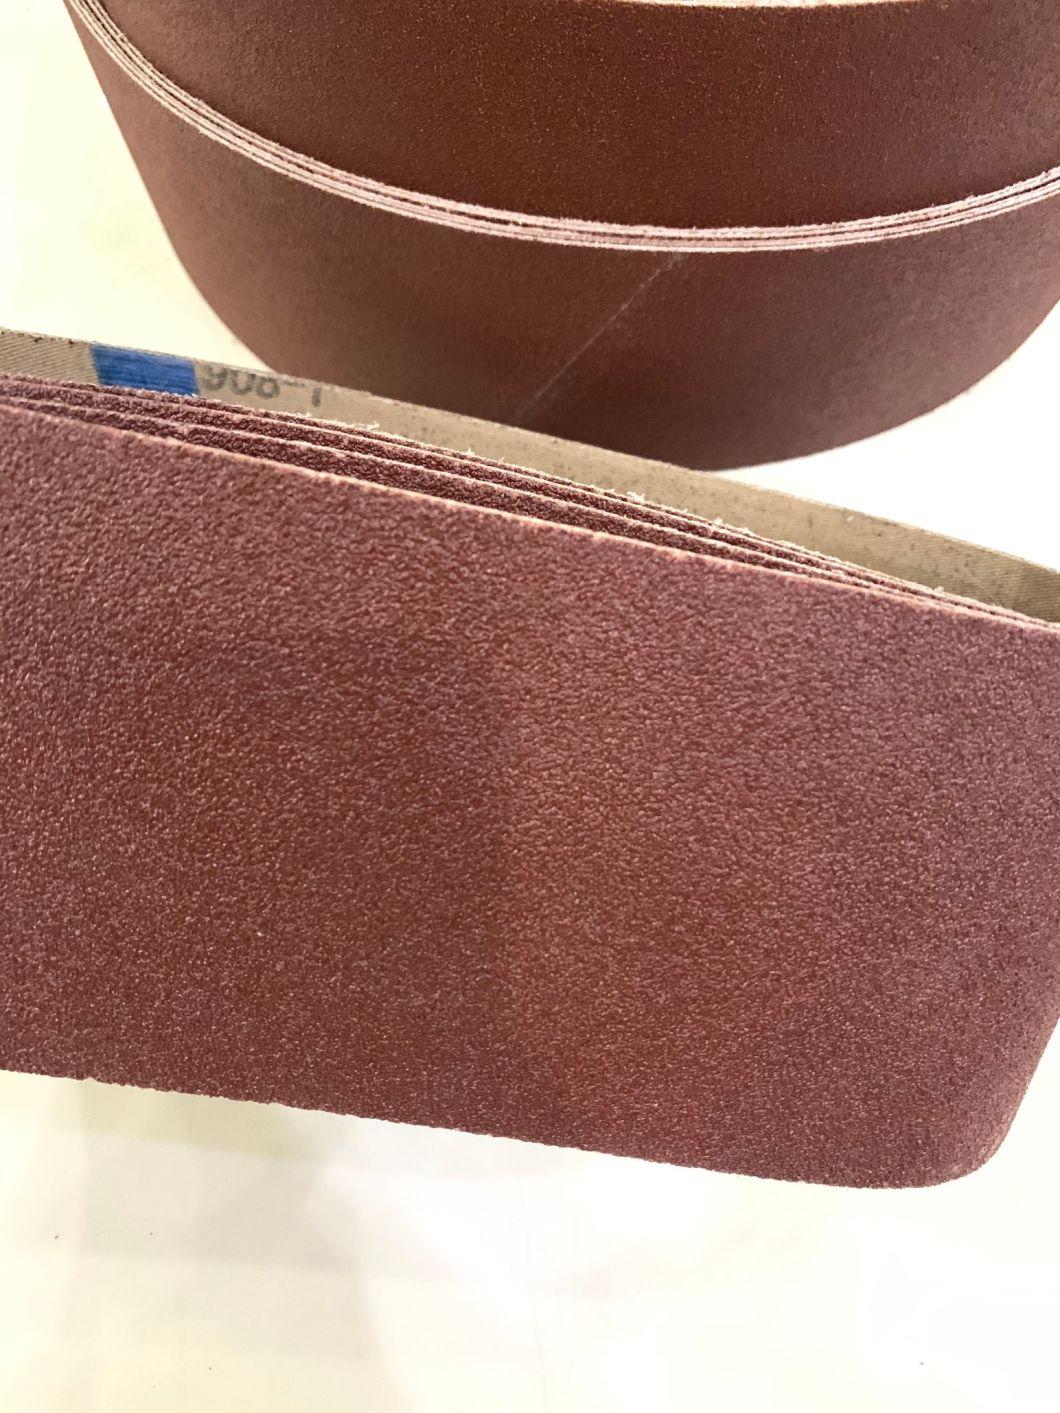 Aluminium Oxide Sanding Belts for Polishing, Grinding and Rust Removing